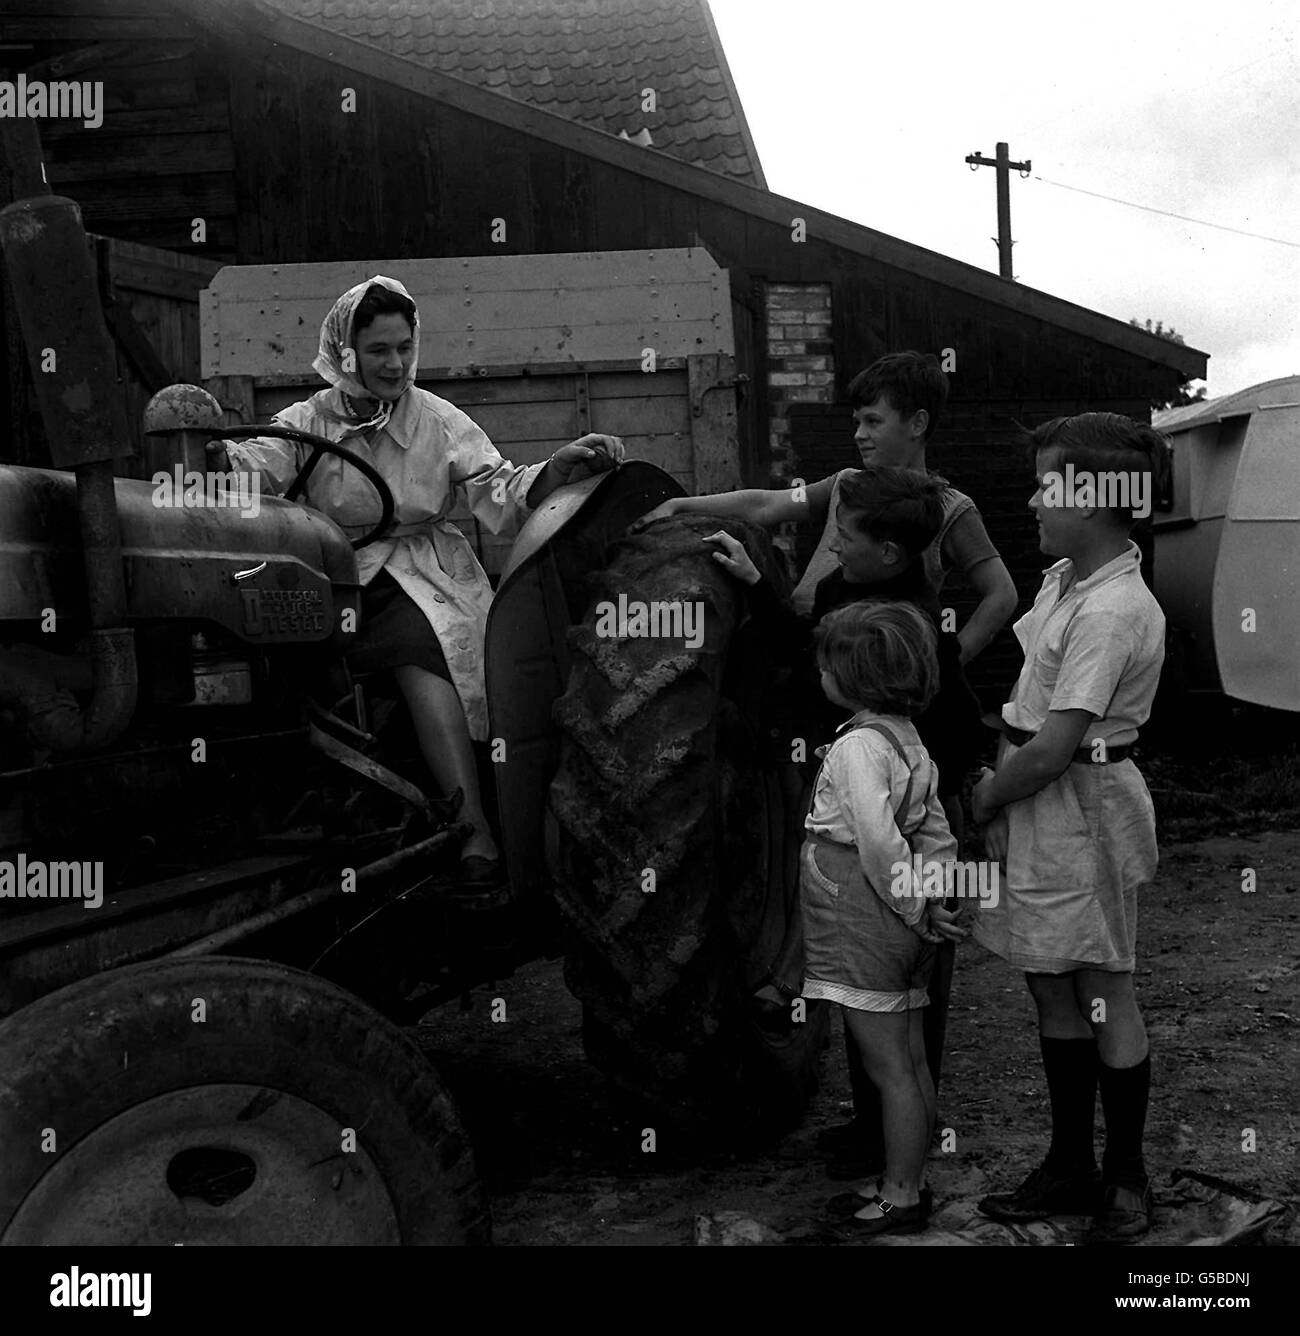 NORFOLK FARM 1960: Mrs Elaine Kellett, 36 year old winner of the Ford Foundation English Speaking Union travel grant as 'British Country Housewife No 1', is watched by her 4 children as she takes the wheel of her tractor on her 149 acre farm, Park Farm, Gressenhall, Norfolk. Stock Photo